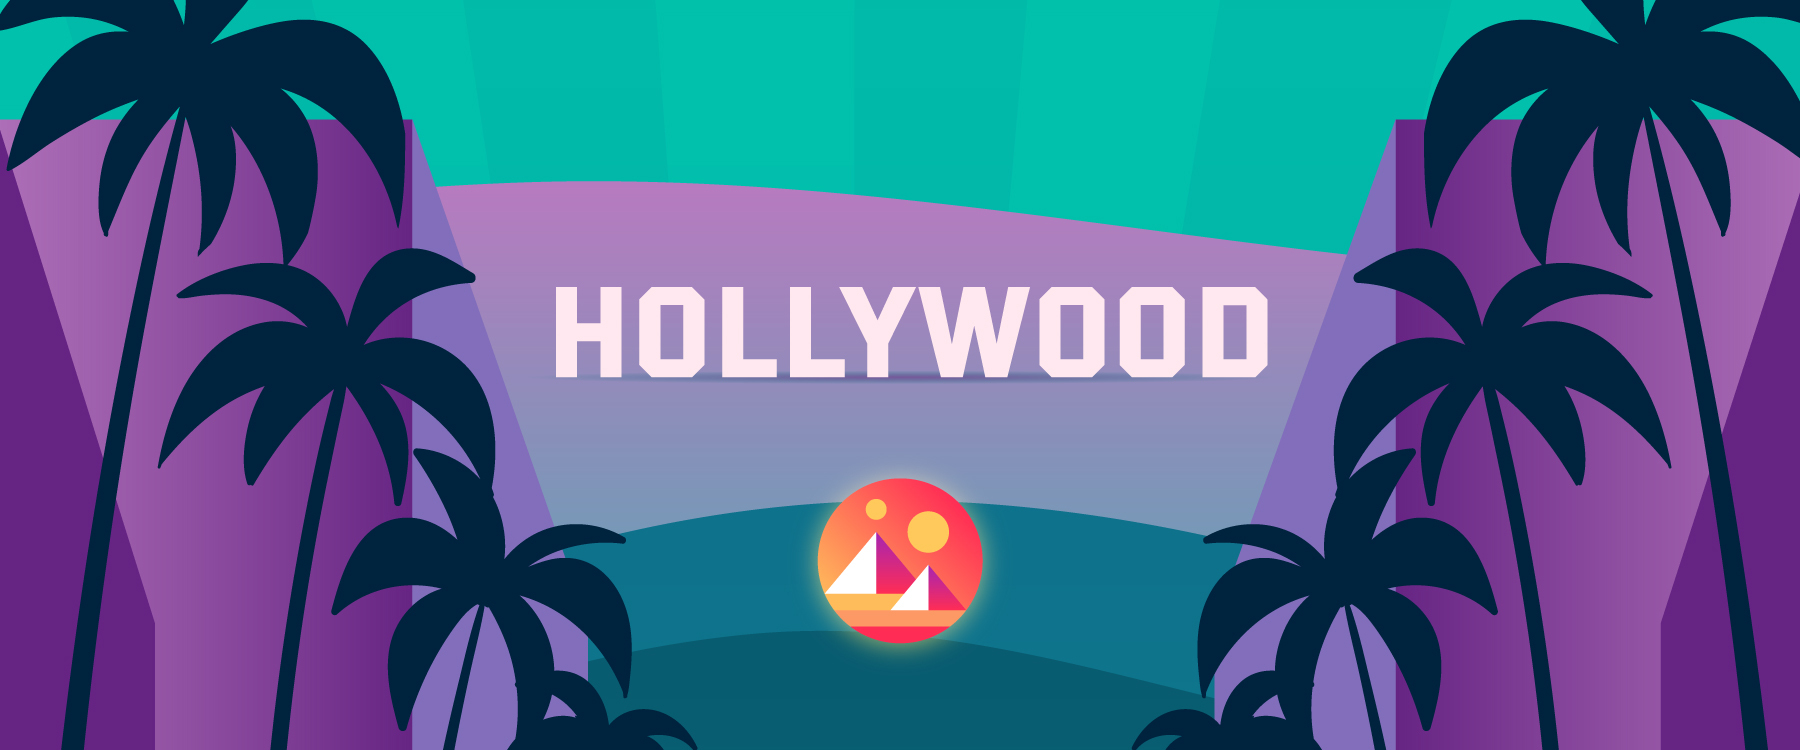 weekly-wrap-decentraland-goes-to-hollywood-bitoasis-blog